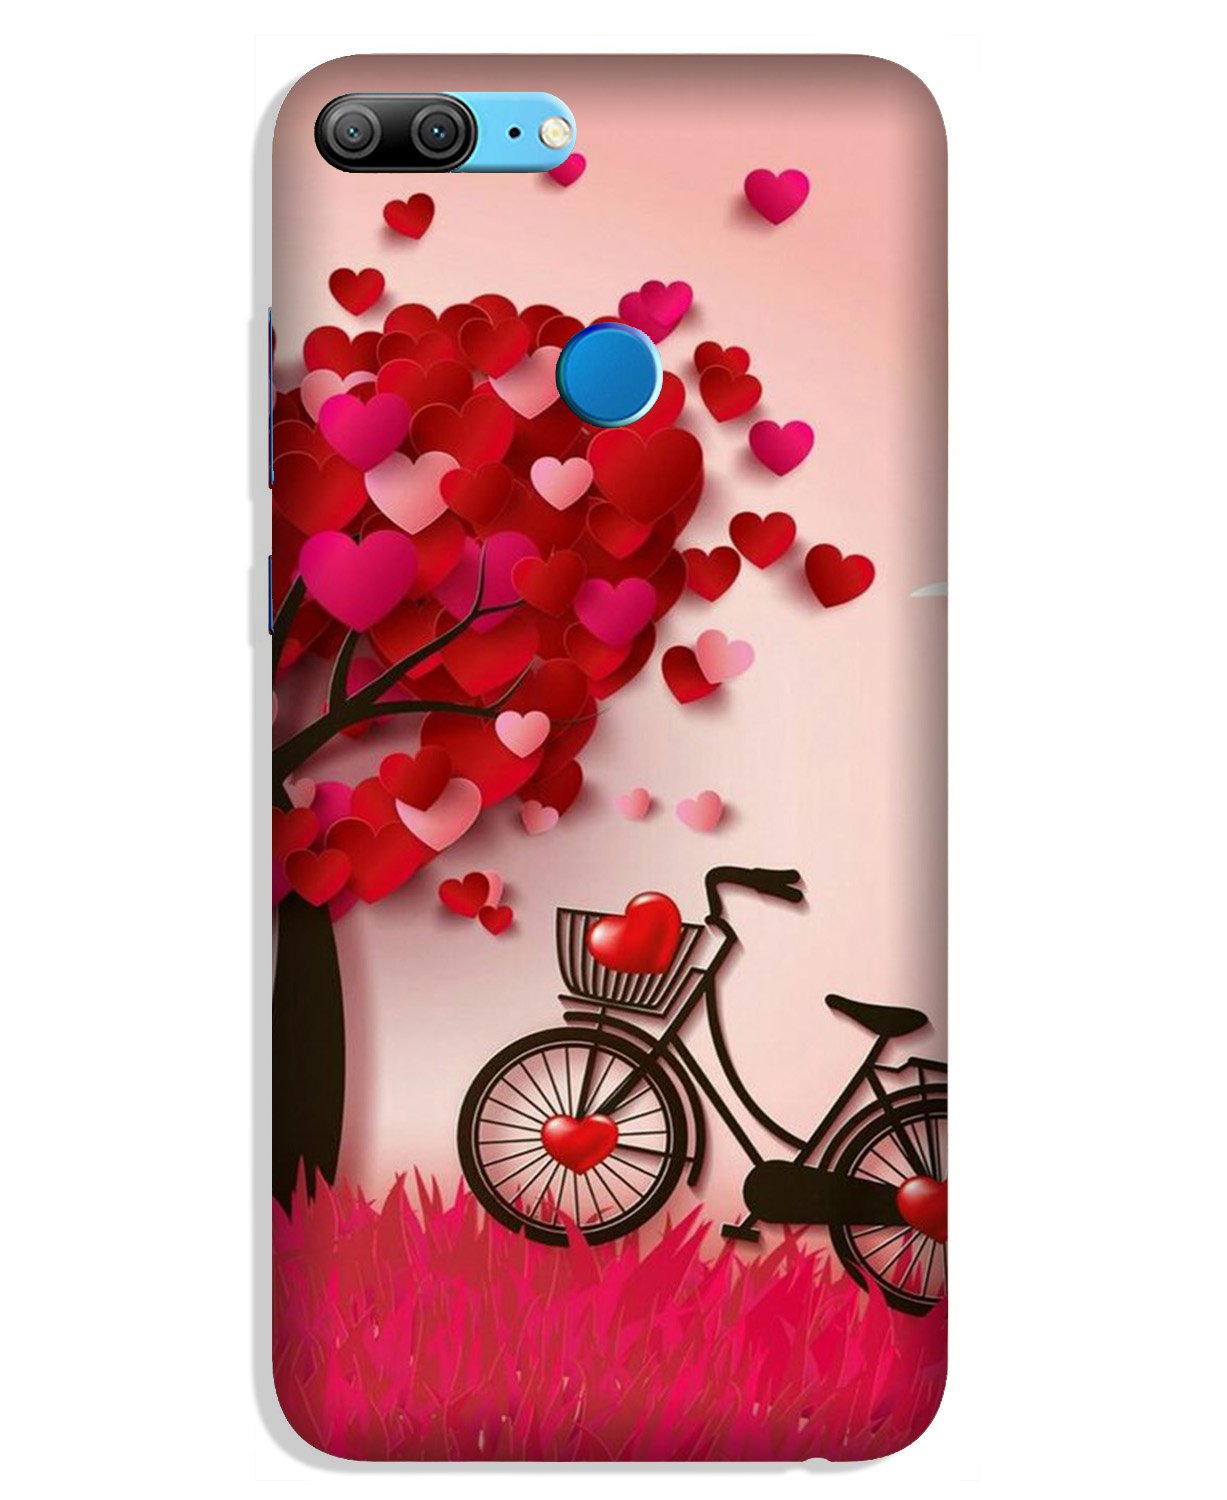 Red Heart Cycle Case for Lenovo K9 / K9 Plus (Design No. 222)